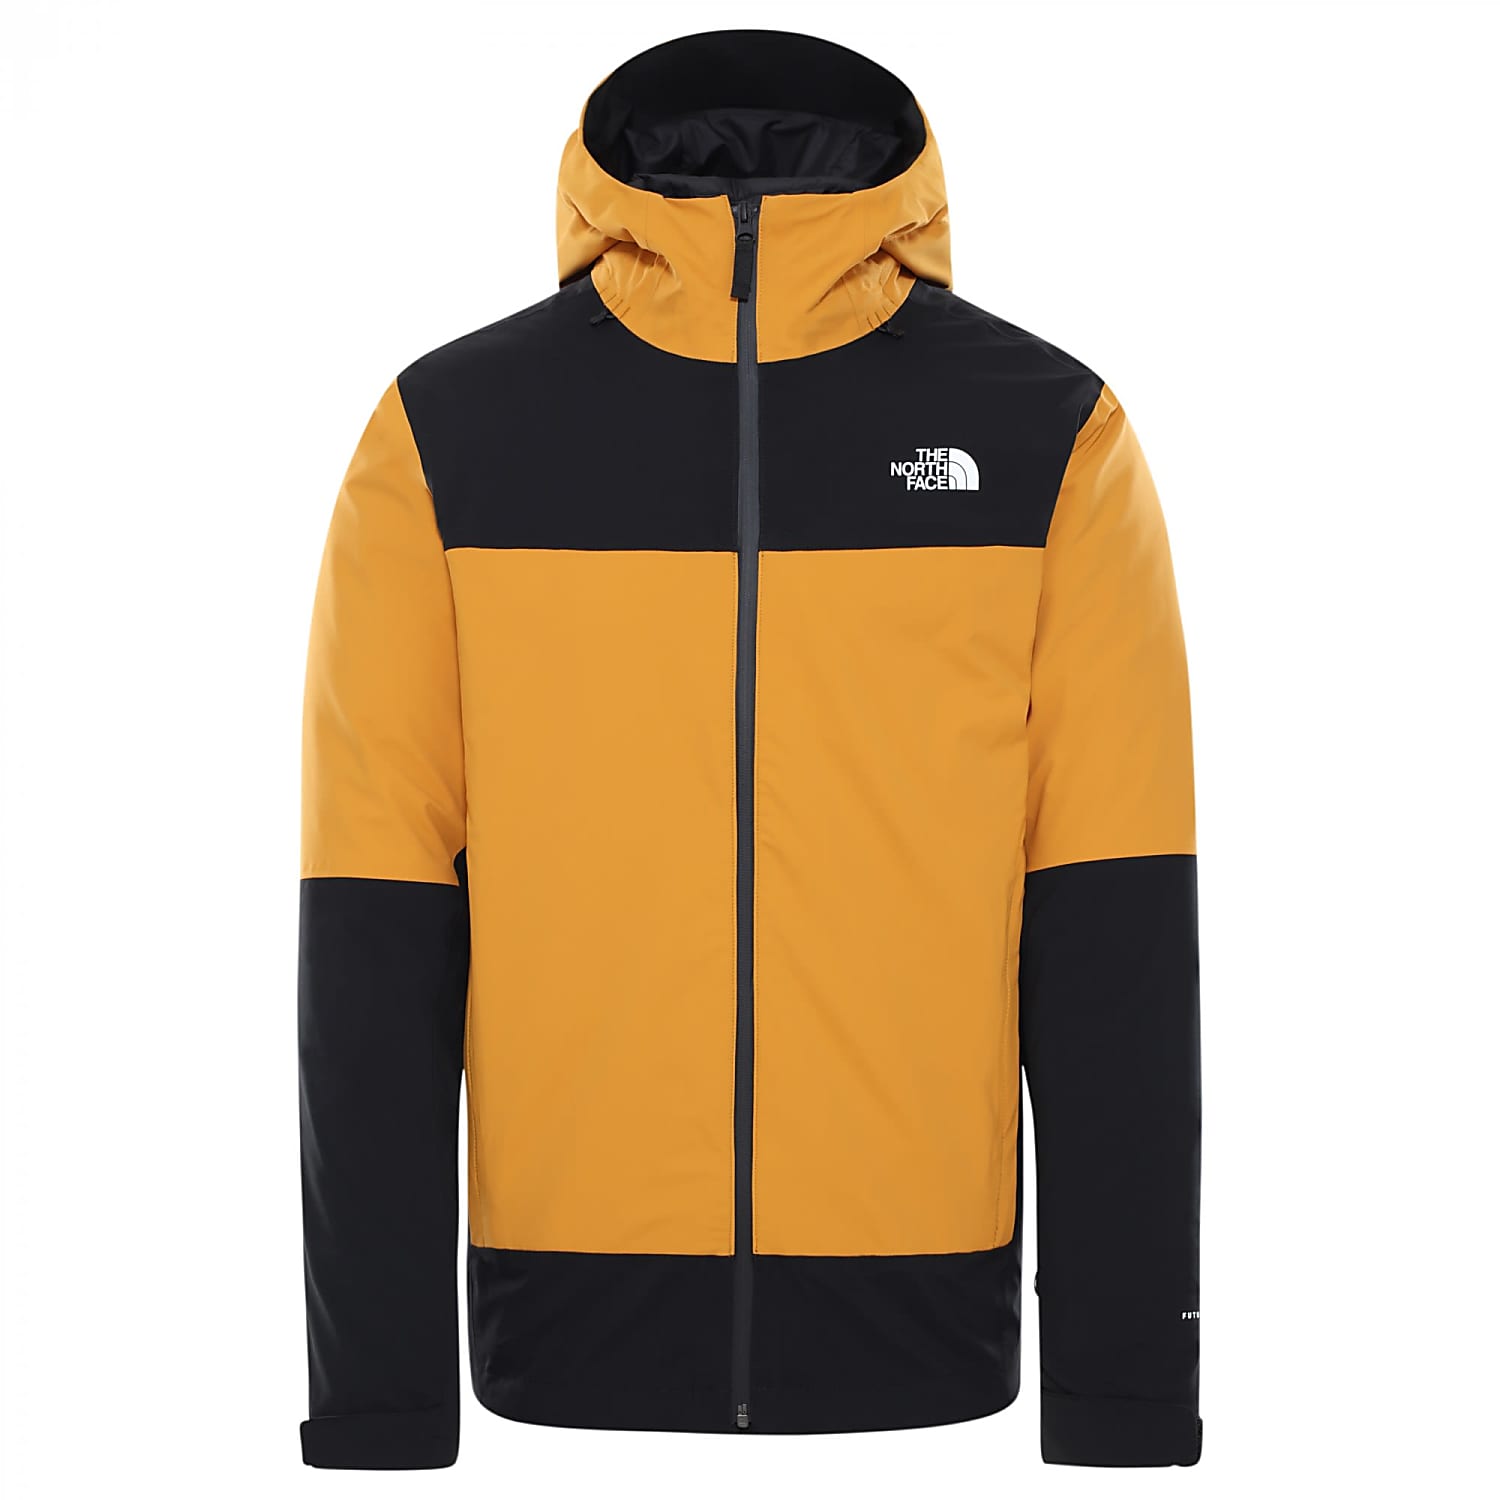 north face mountain light triclimate jacket sale